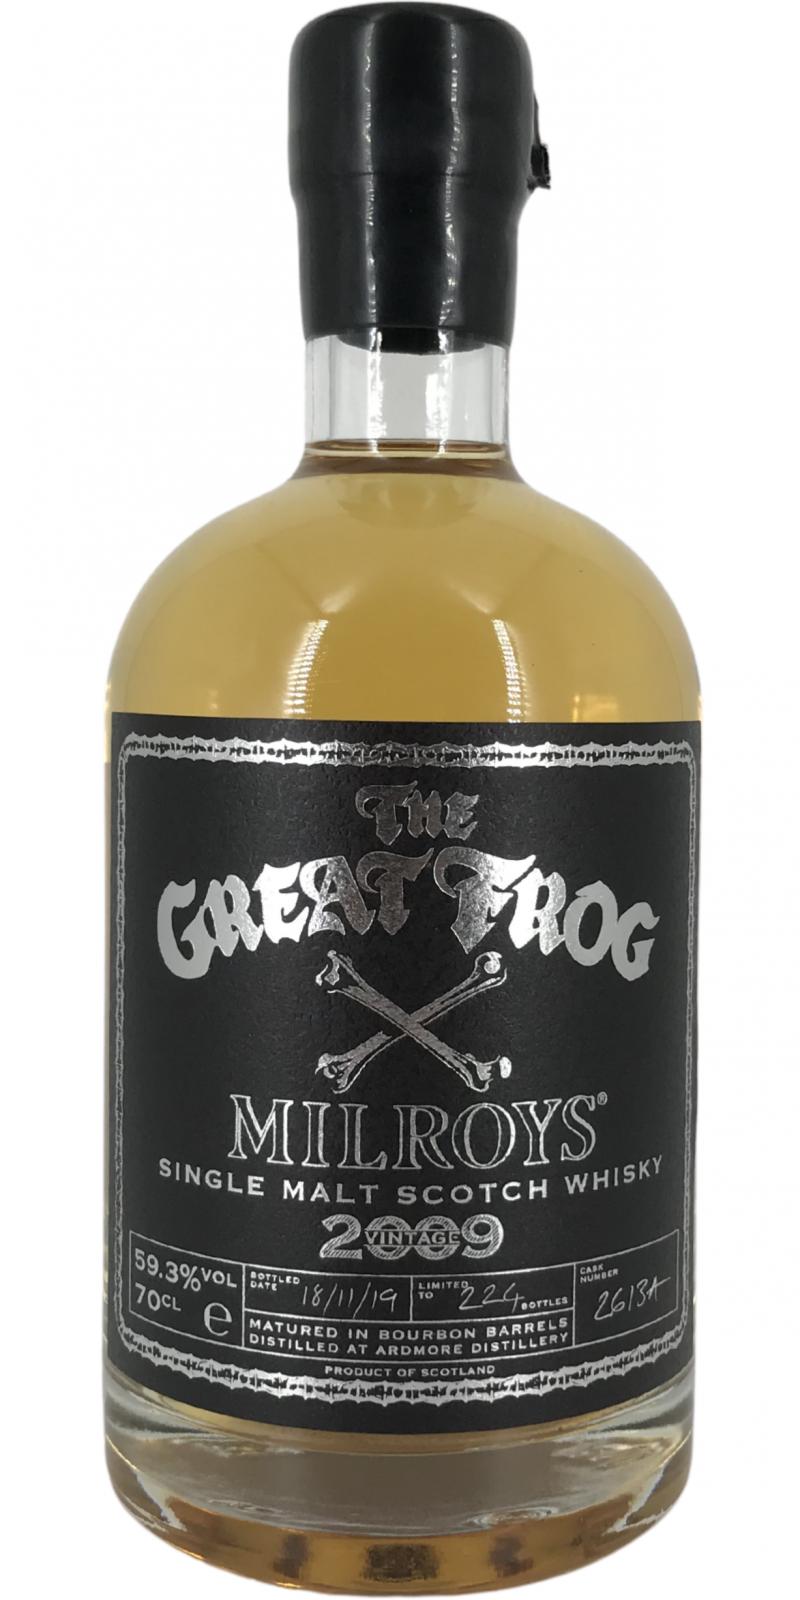 Ardmore 2009 Soh Bourbon Barrel 2613A The Great Frog X Milroy's 59.3% 700ml